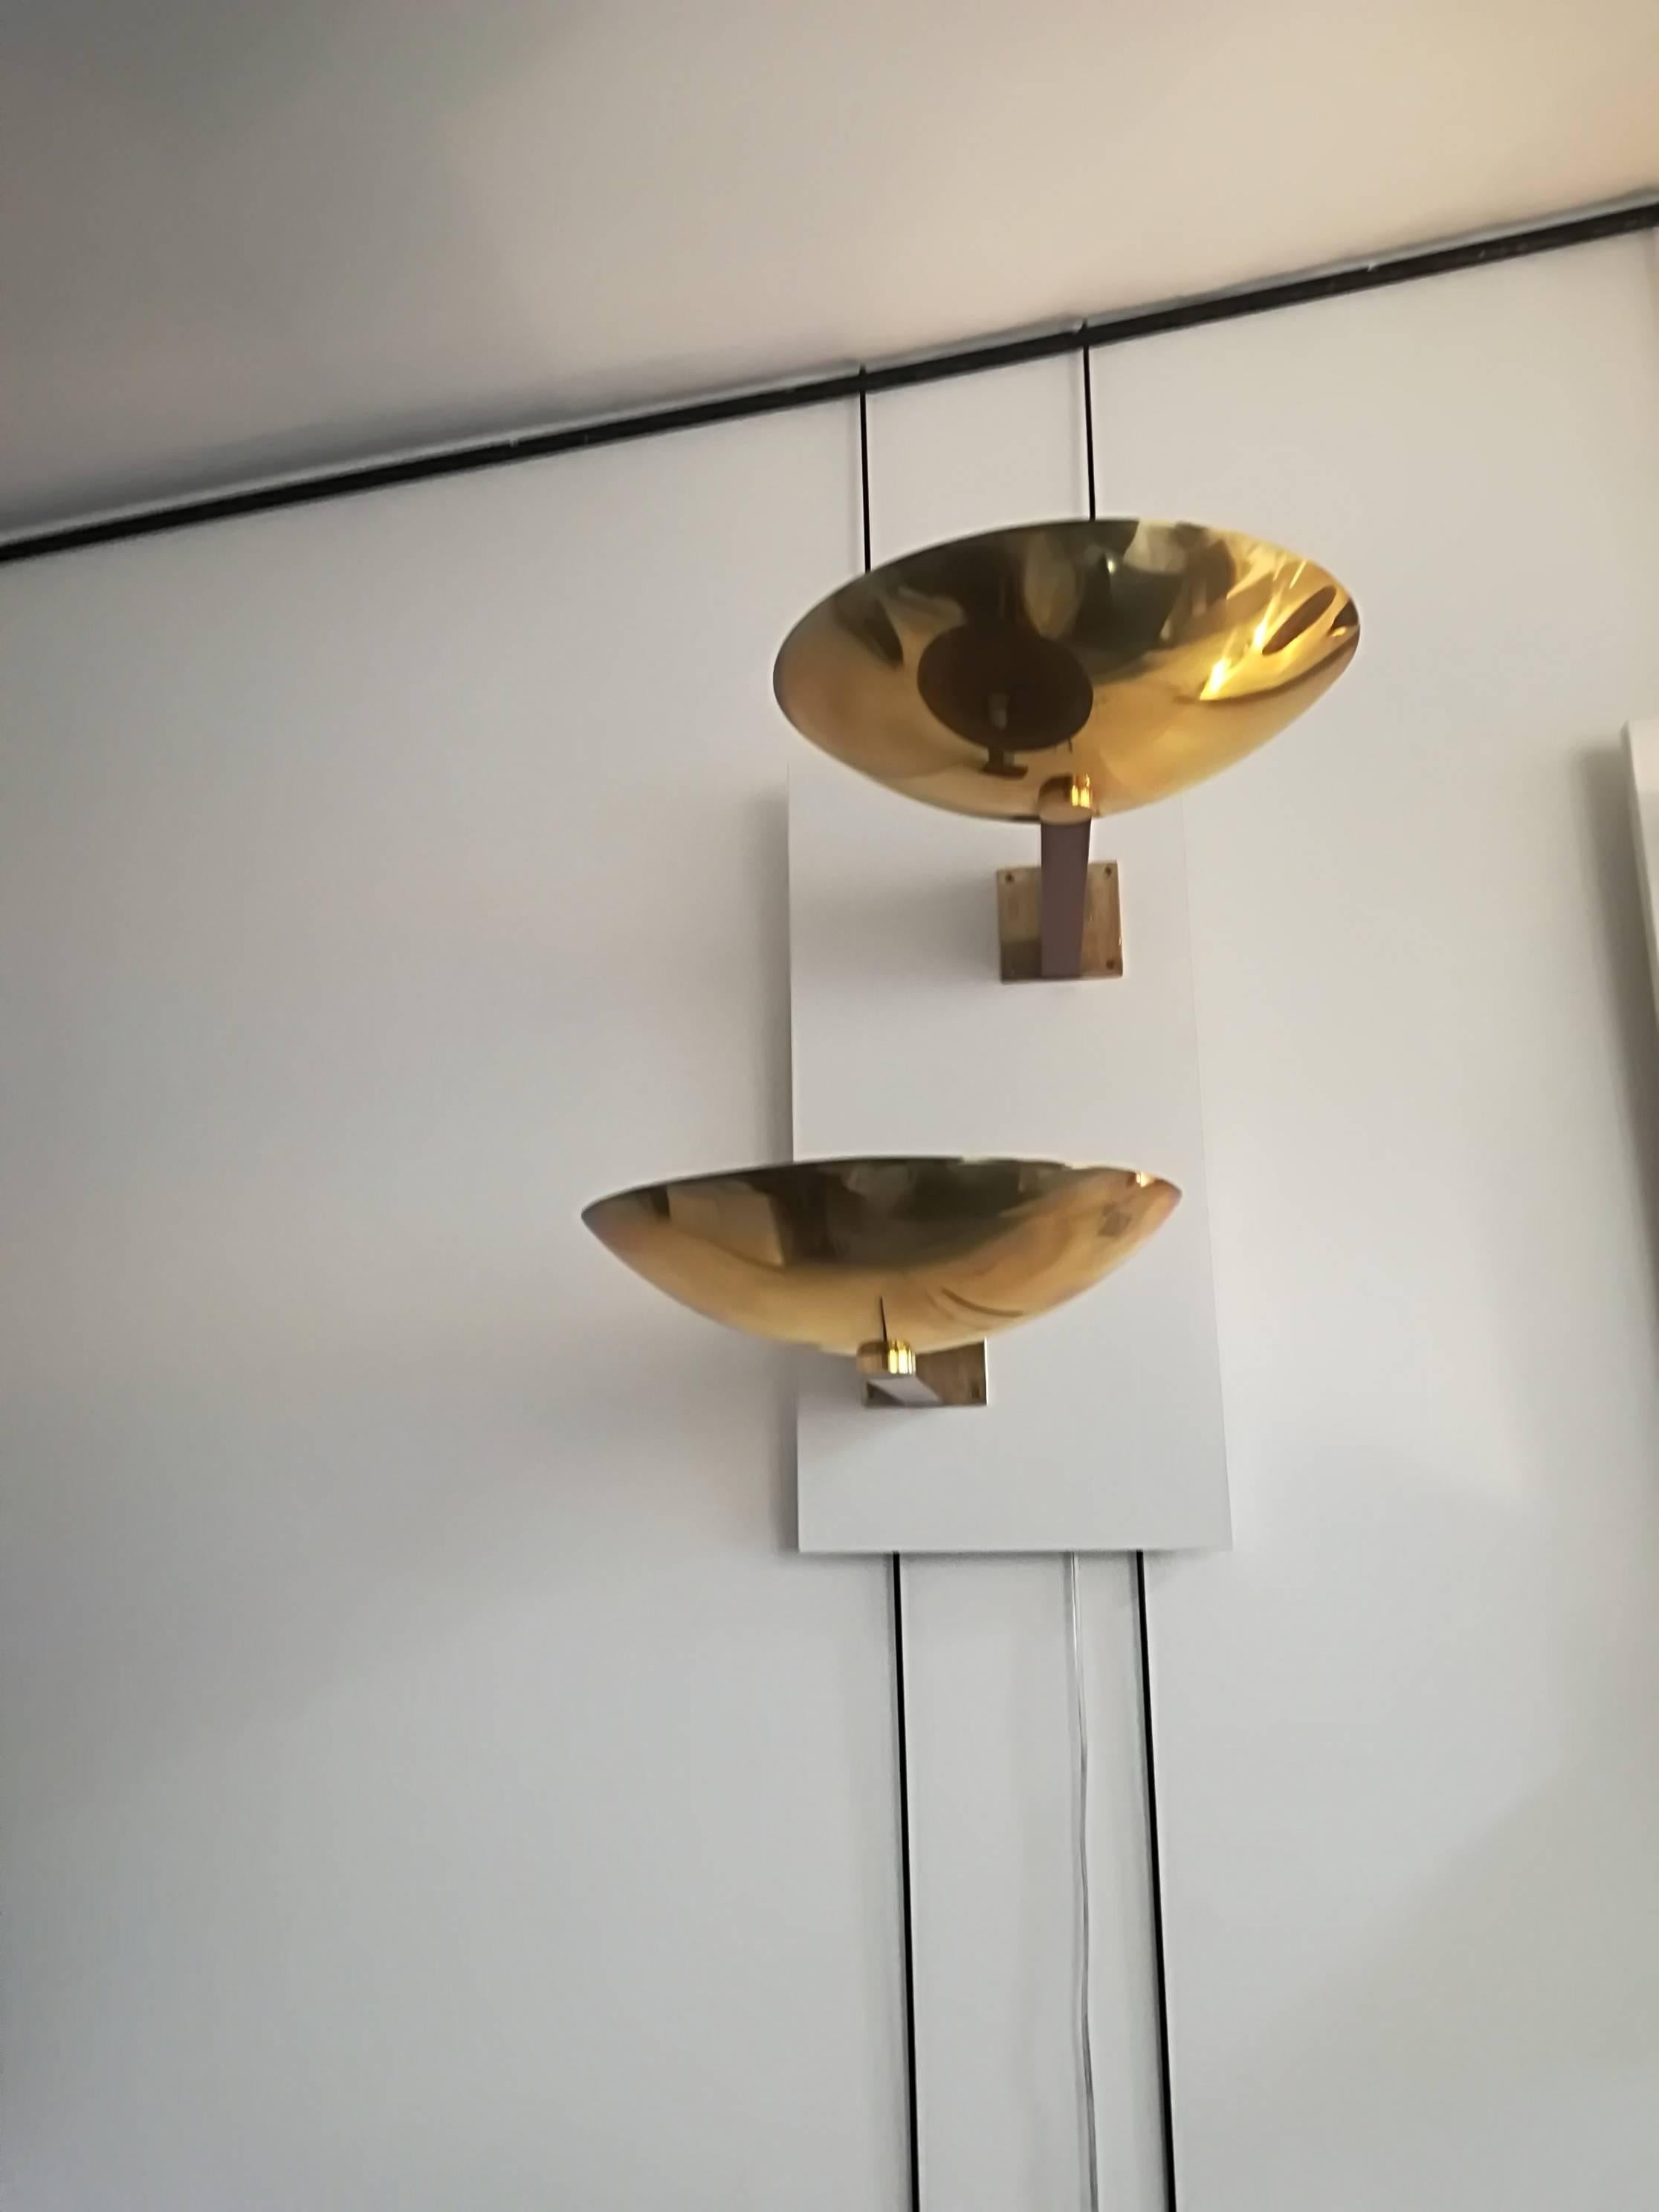 Eckart Muthesius pair of wall lights in brass and wood, Tecnolumen, circa 1960, stamped and numbered.